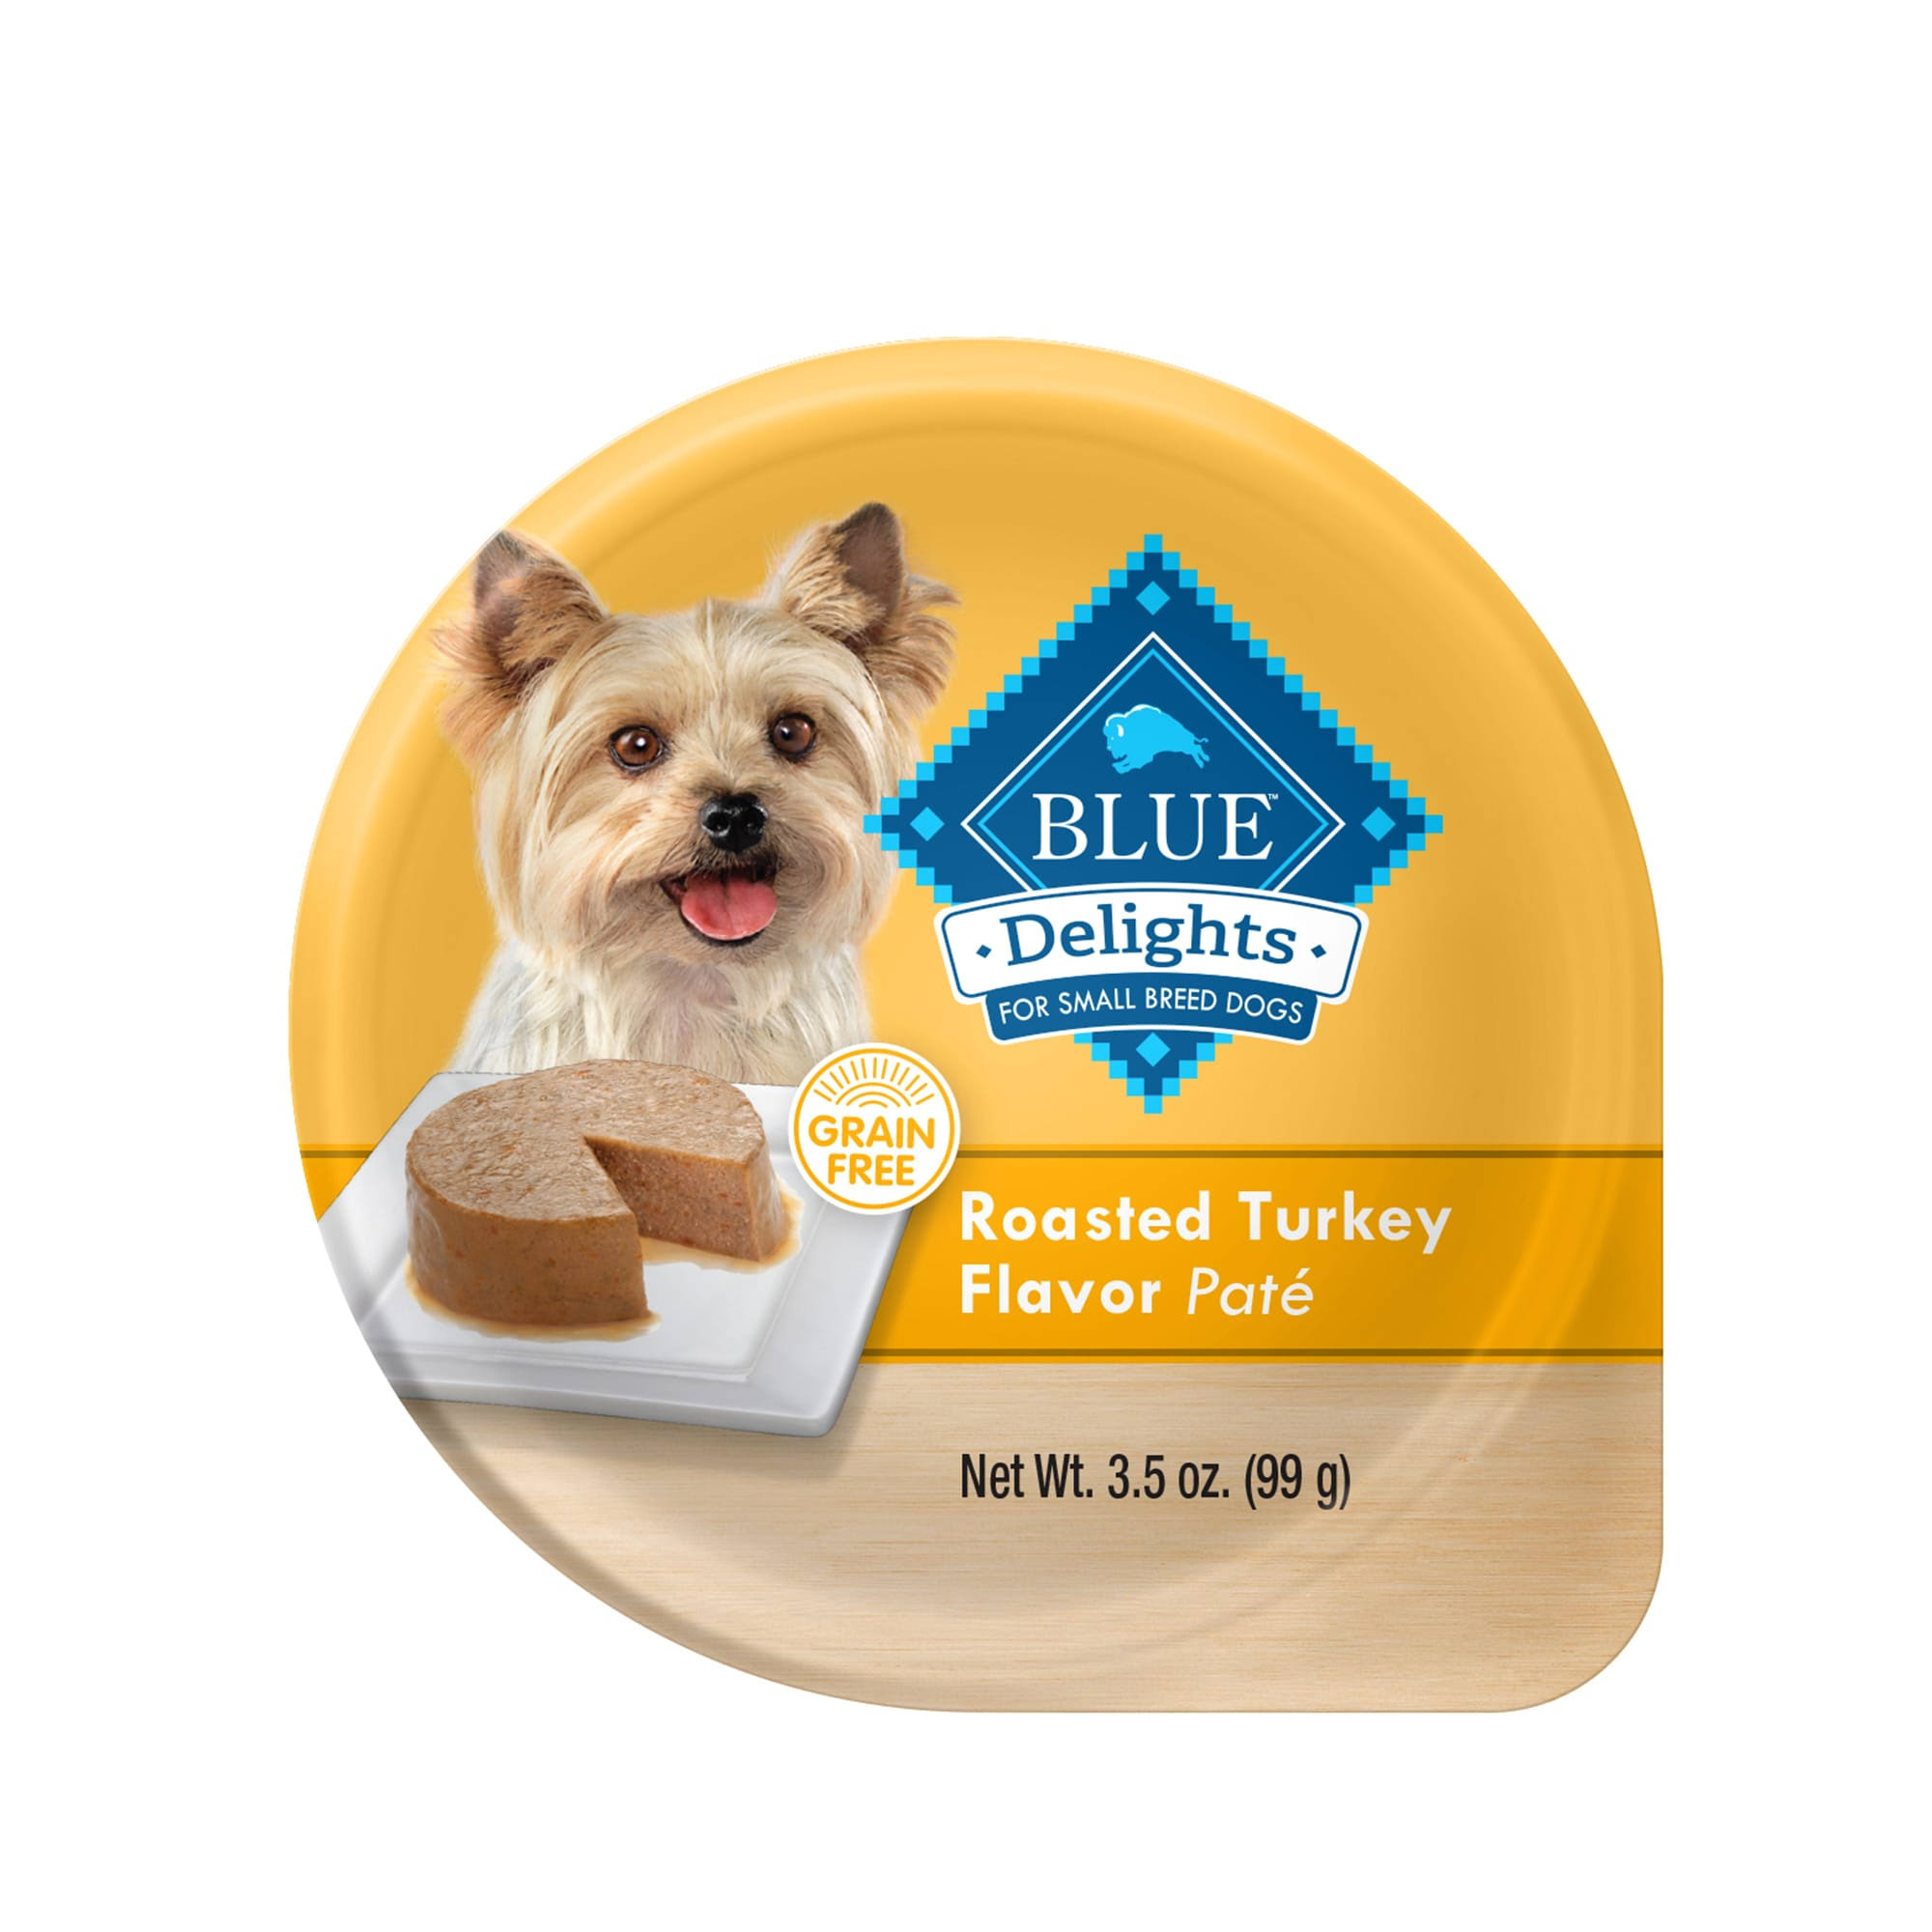 Blue Buffalo Blue Delights Food for Dogs, Roasted Turkey Flavor, Pate, for Small Breed Dogs, Grain Free - 3.5 oz